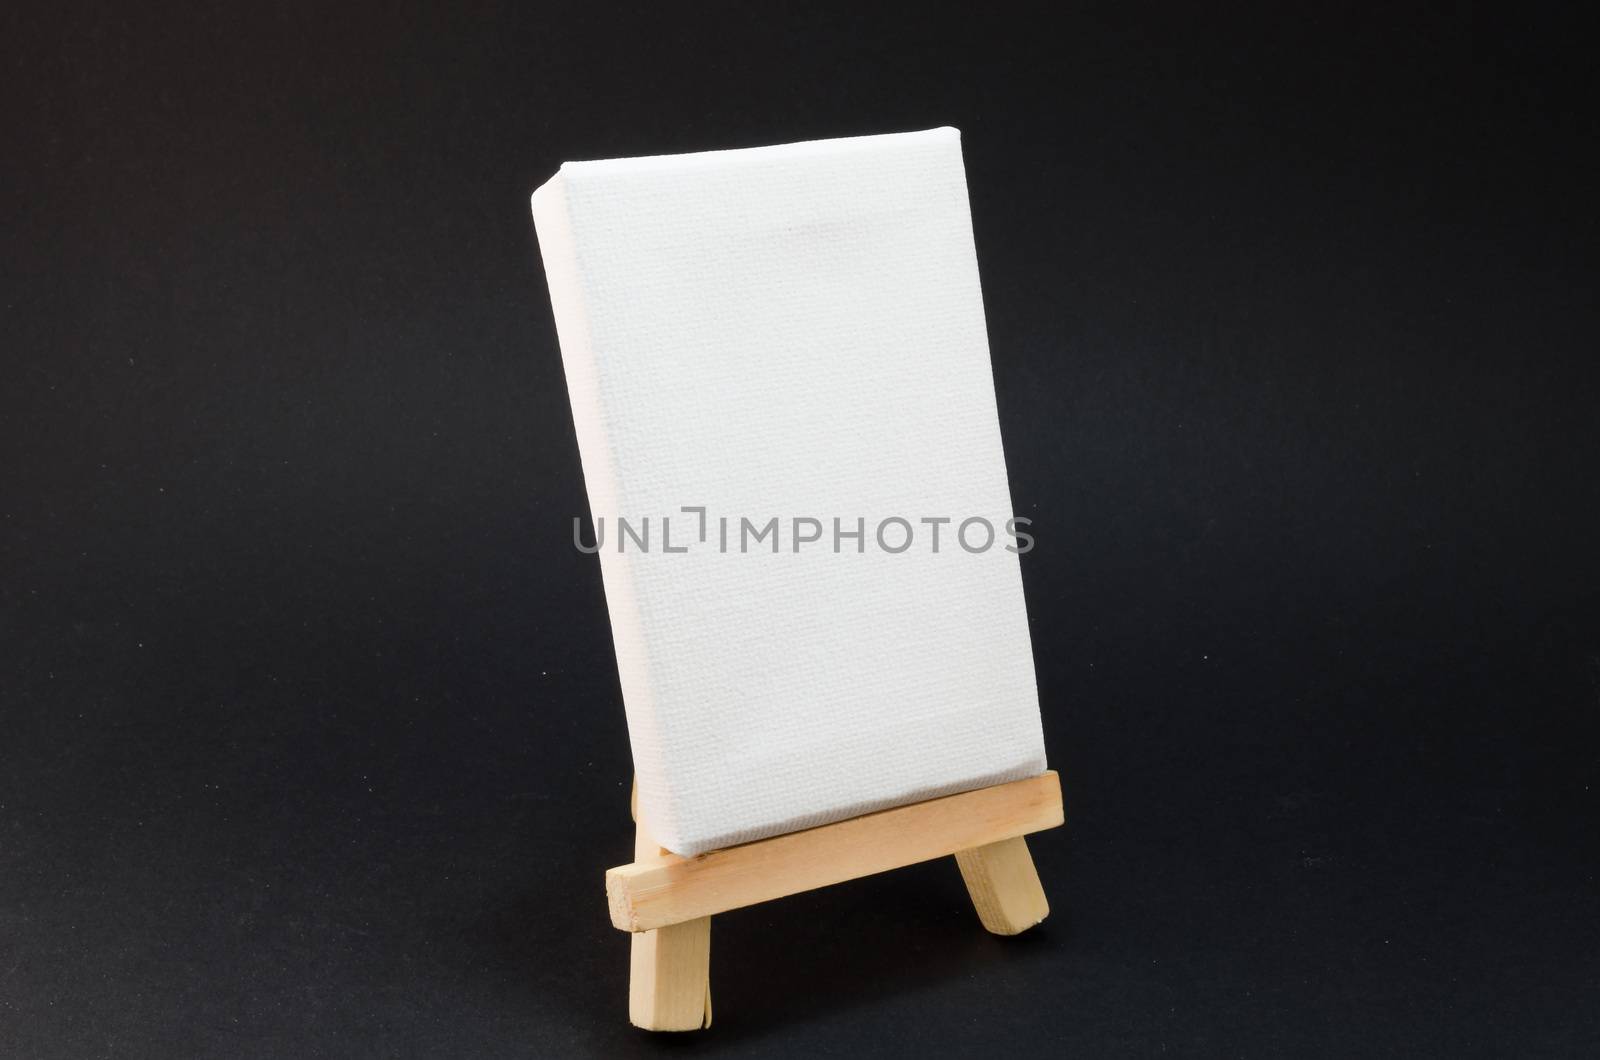 Miniature artist easel, isolated against a black background.